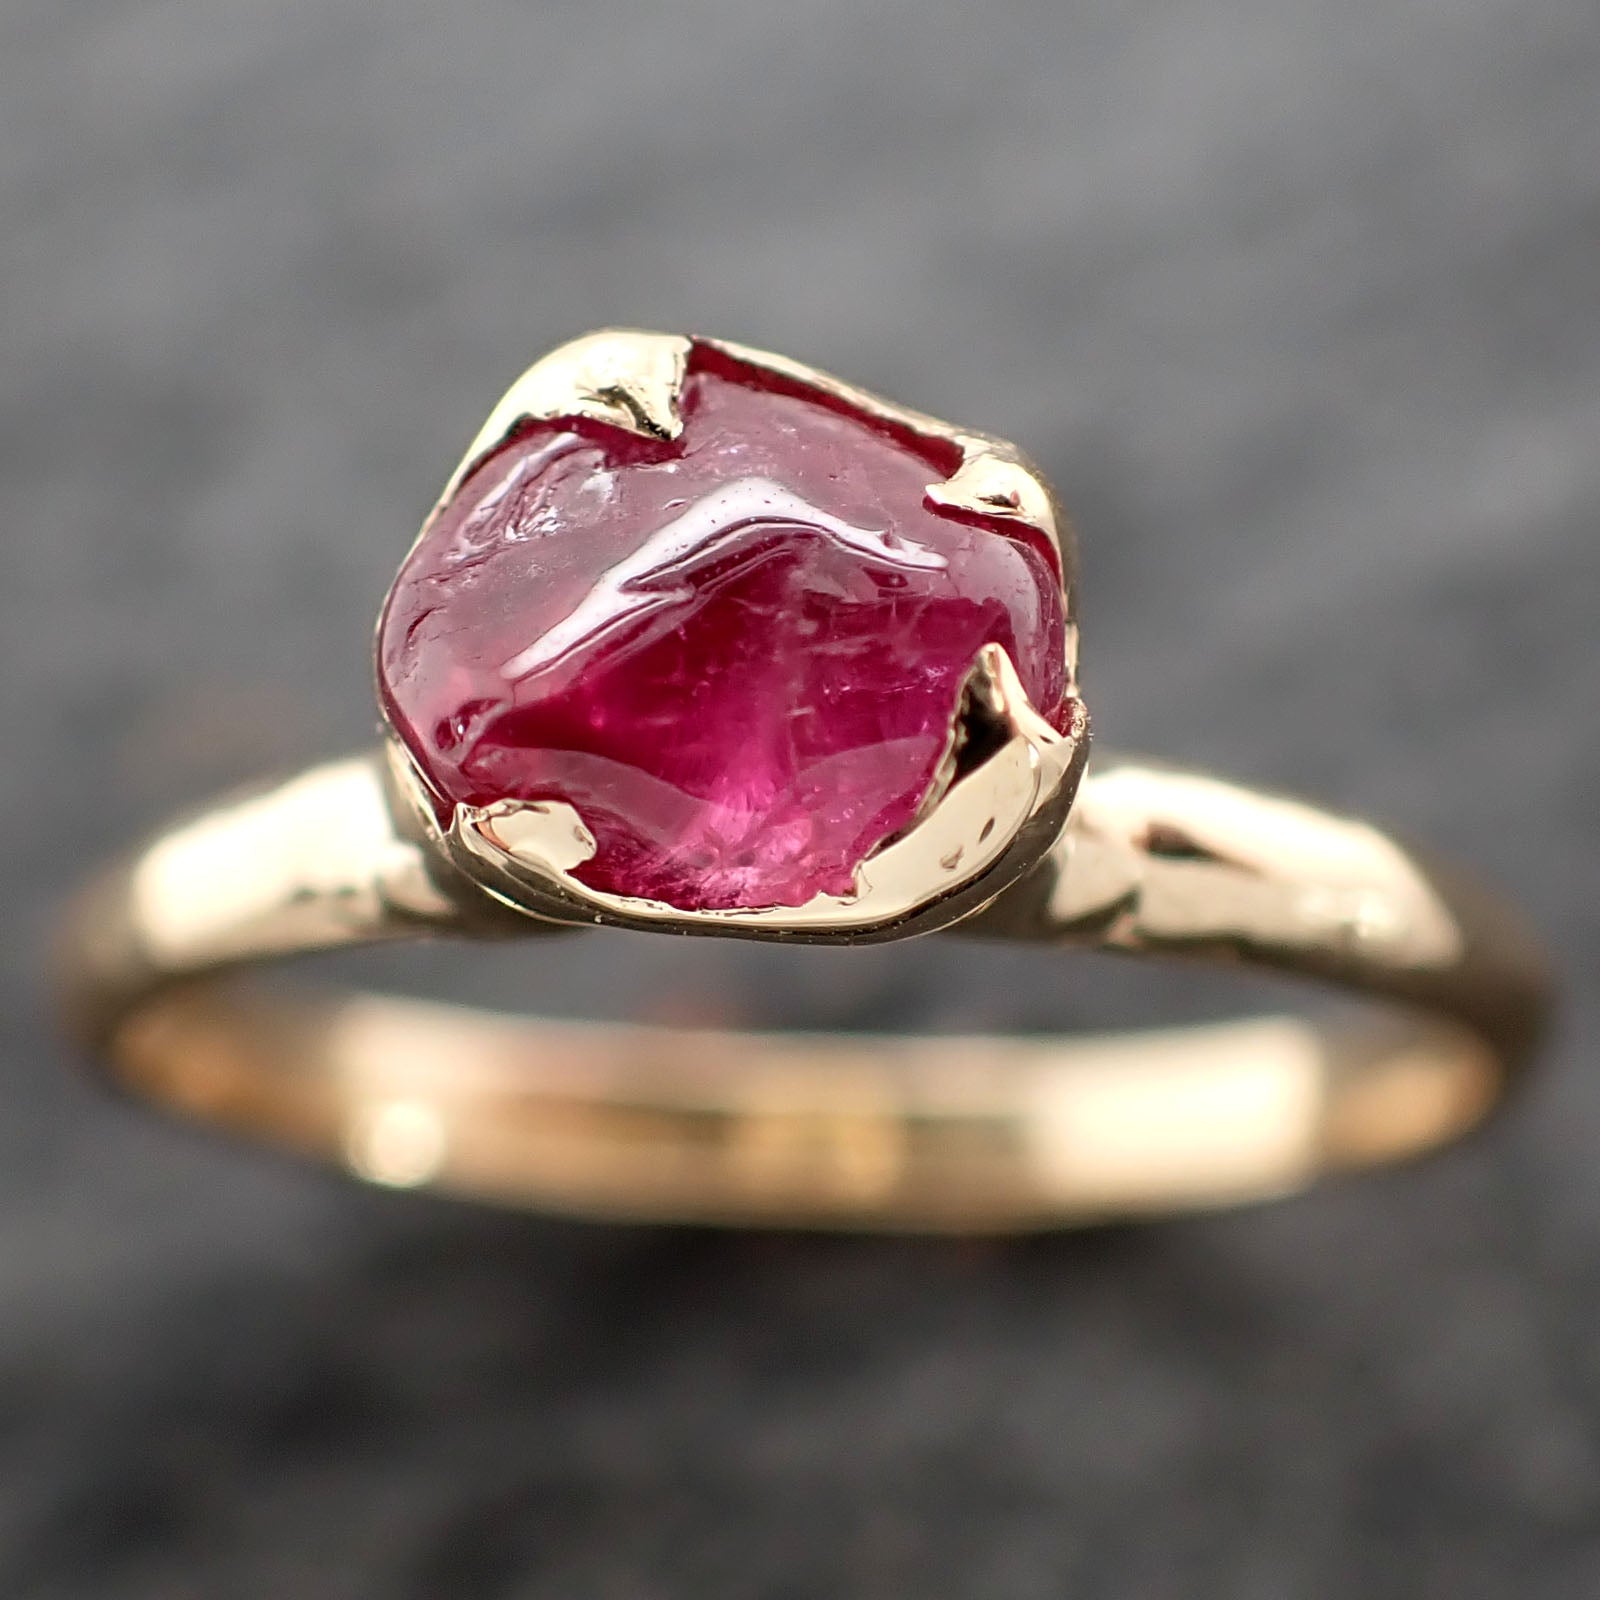 Sapphire tumbled pink tumbled yellow 18k gold Solitaire gemstone ring 2634